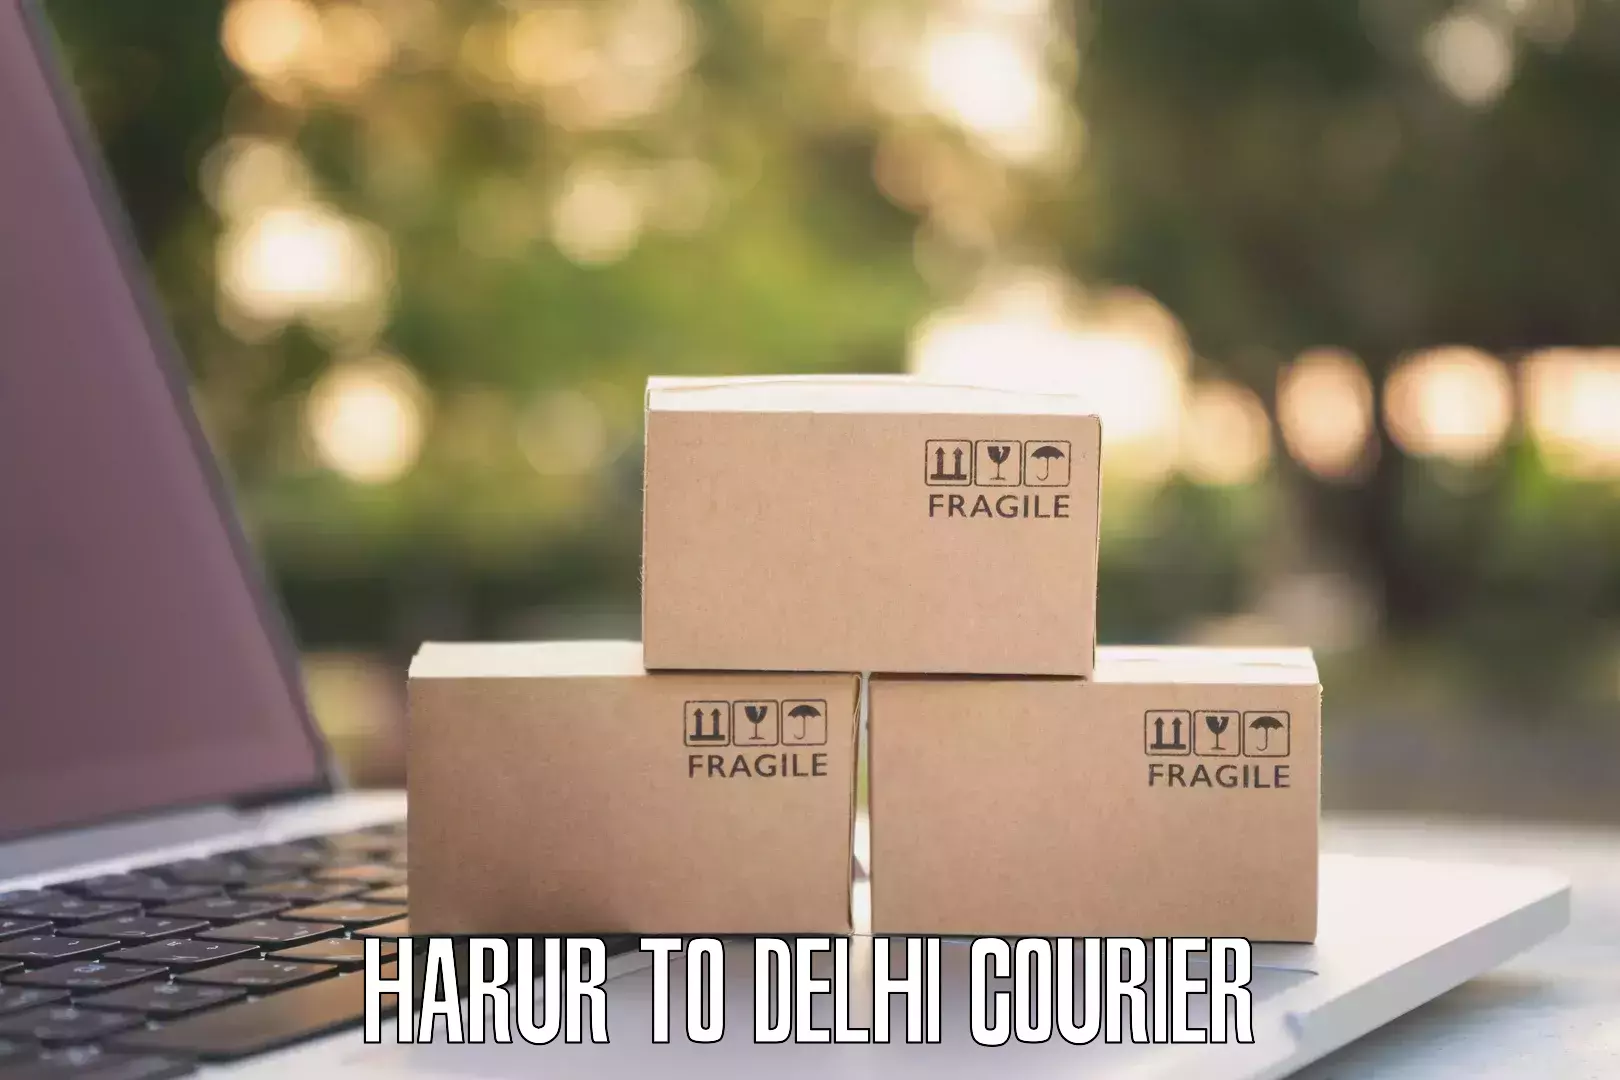 International courier networks Harur to NCR